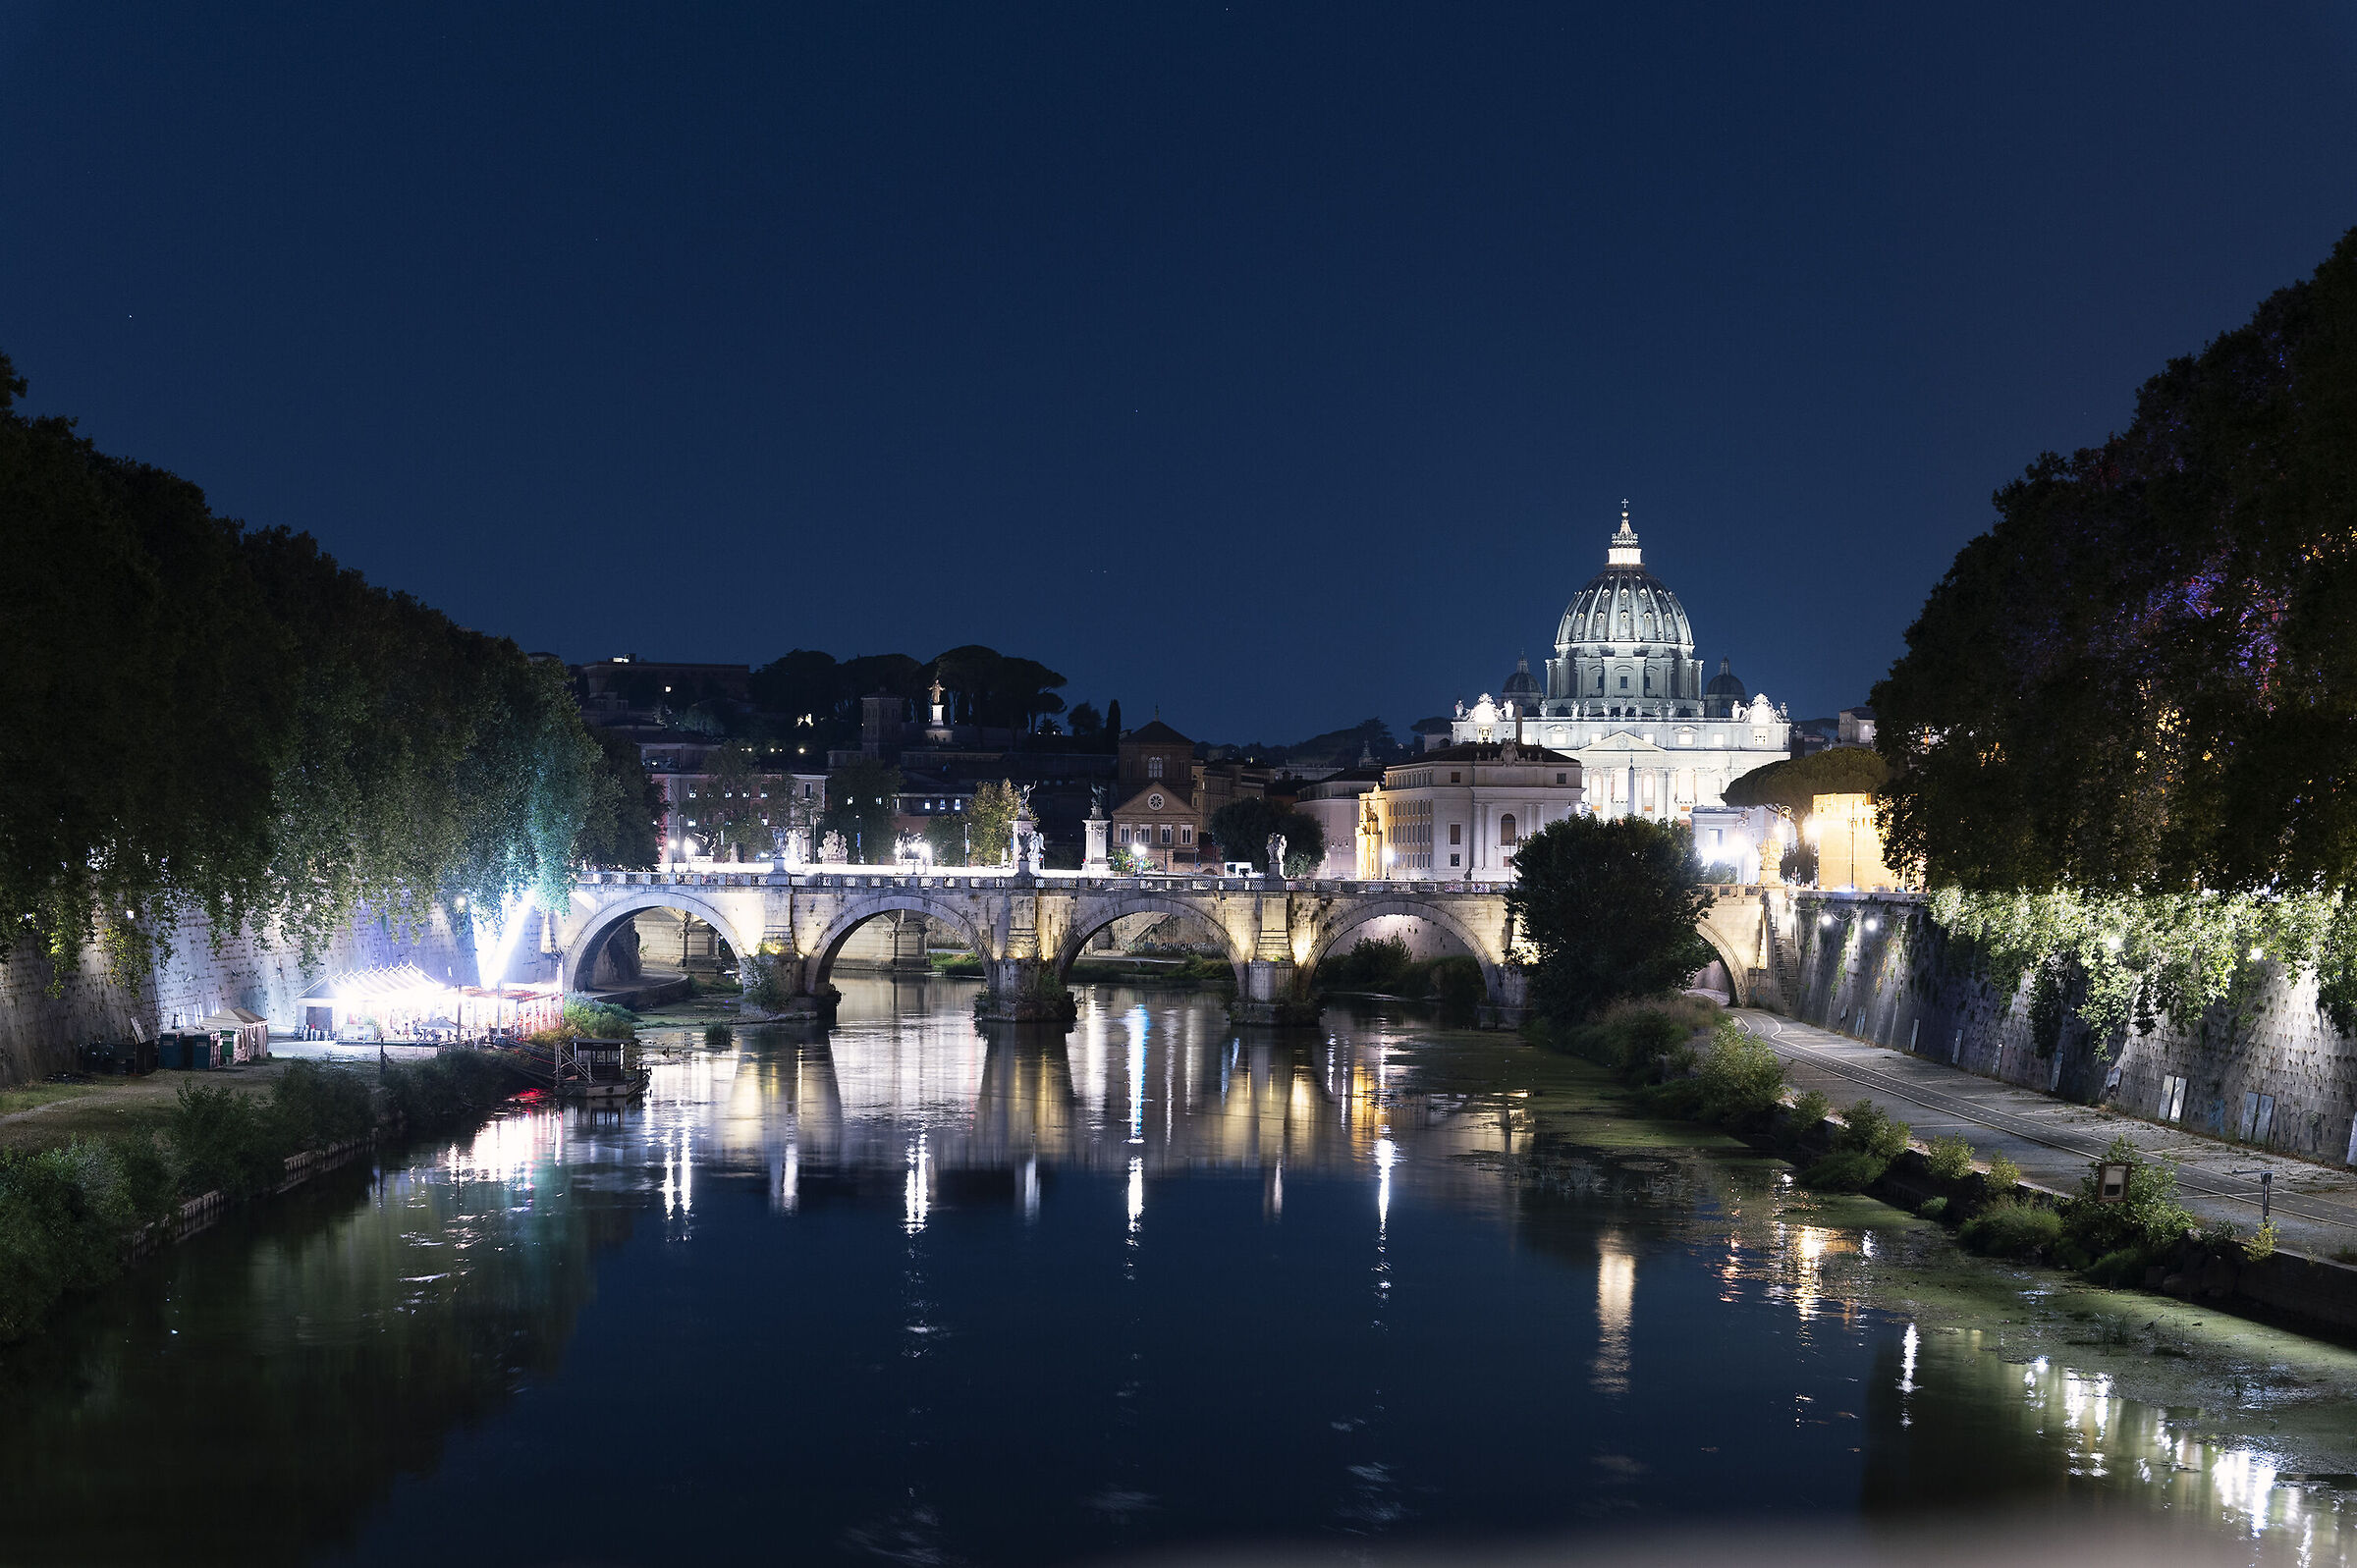 Lungotevere at night...